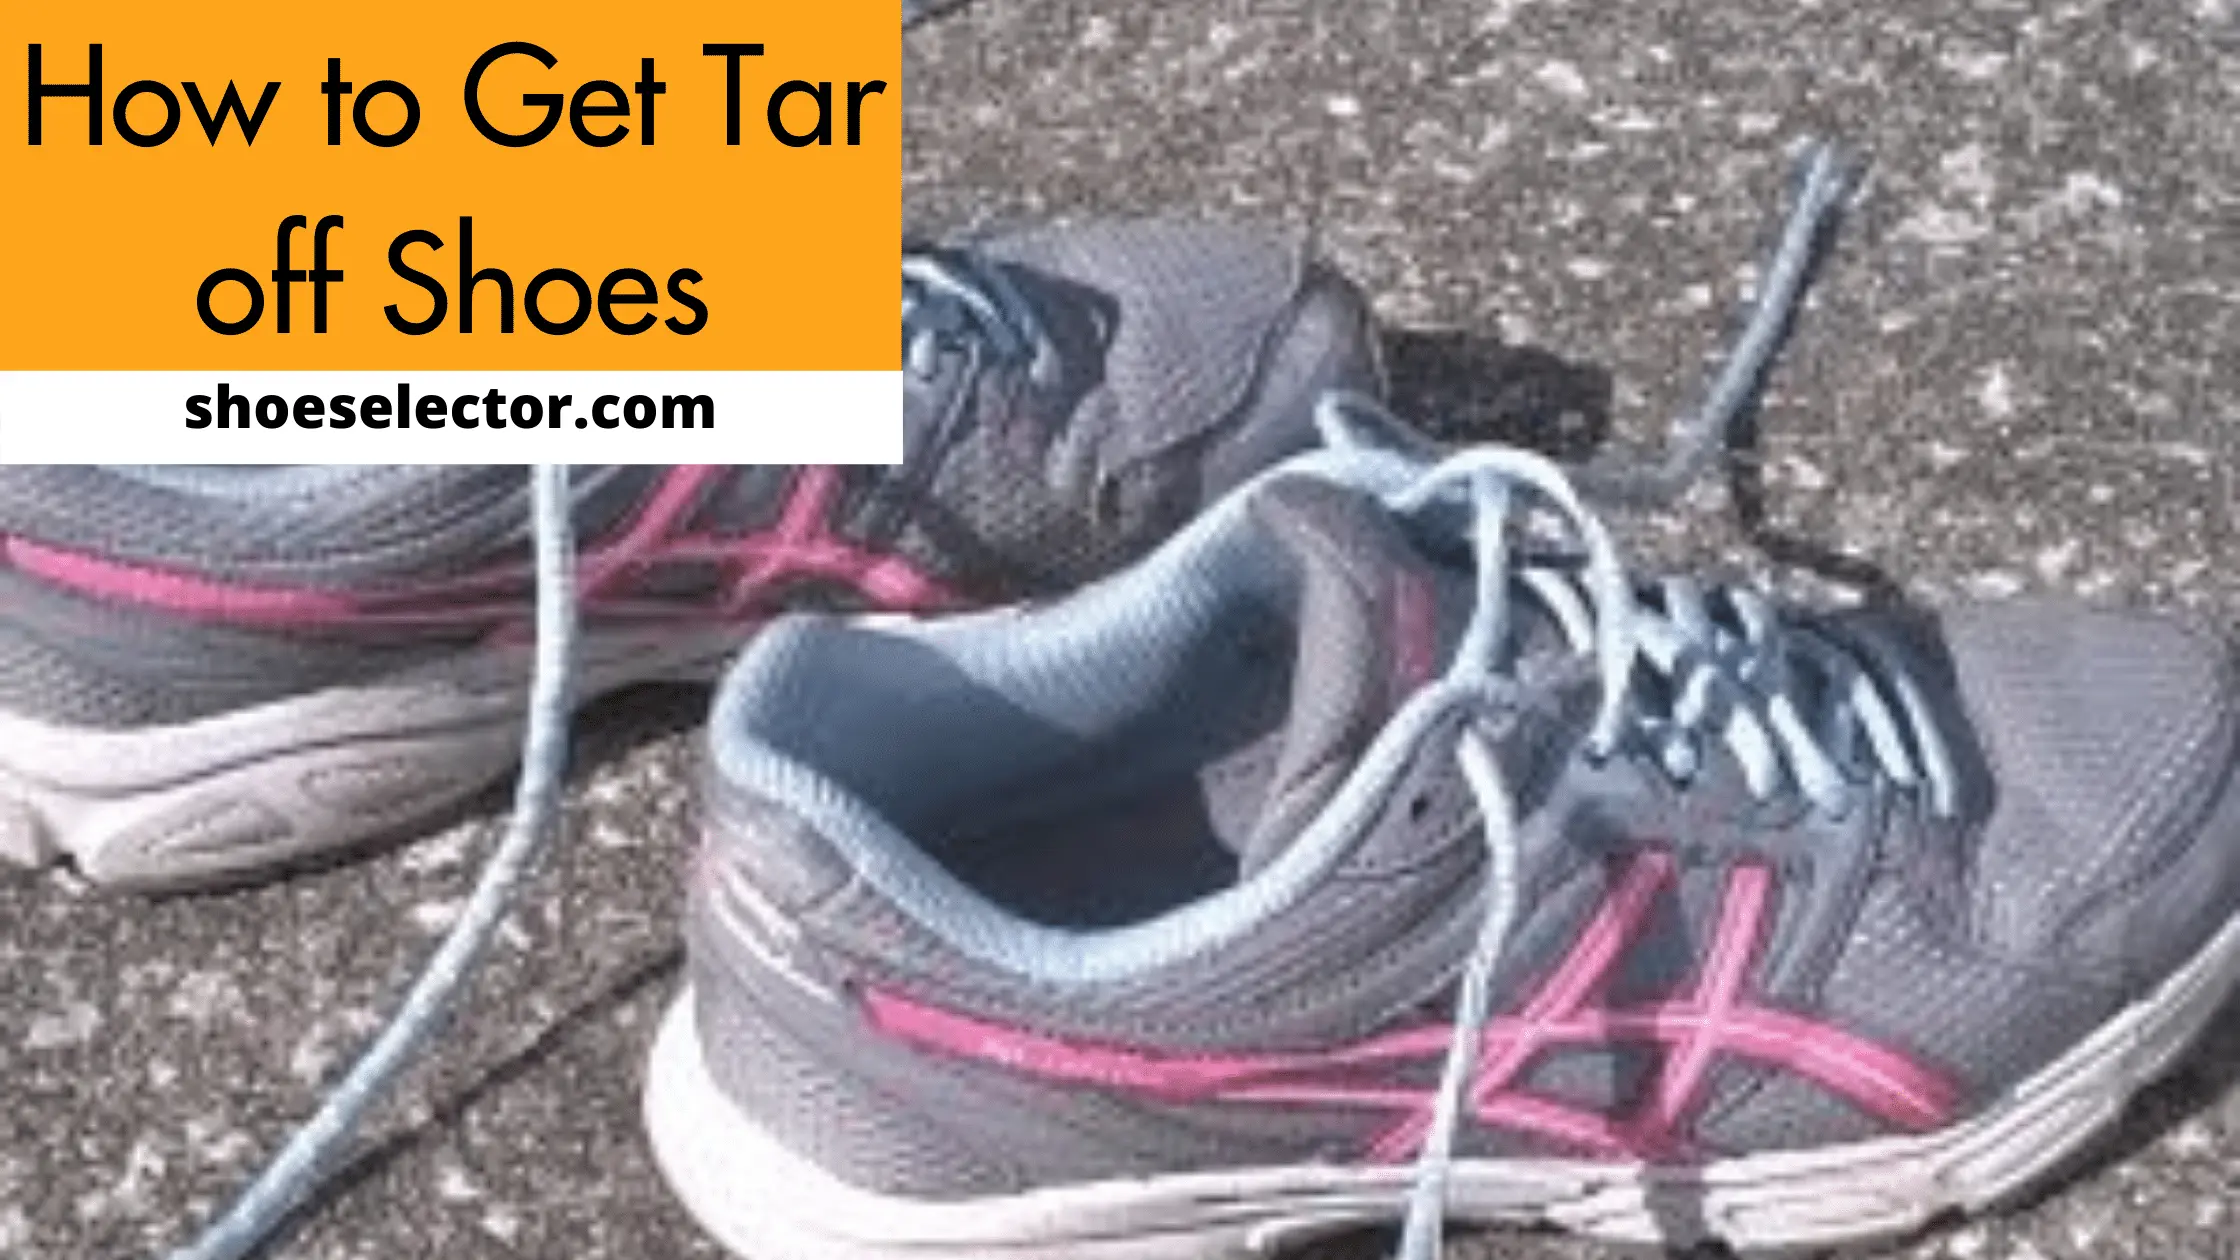 How to Get Tar off Shoes - A Simple And Detailed Guide